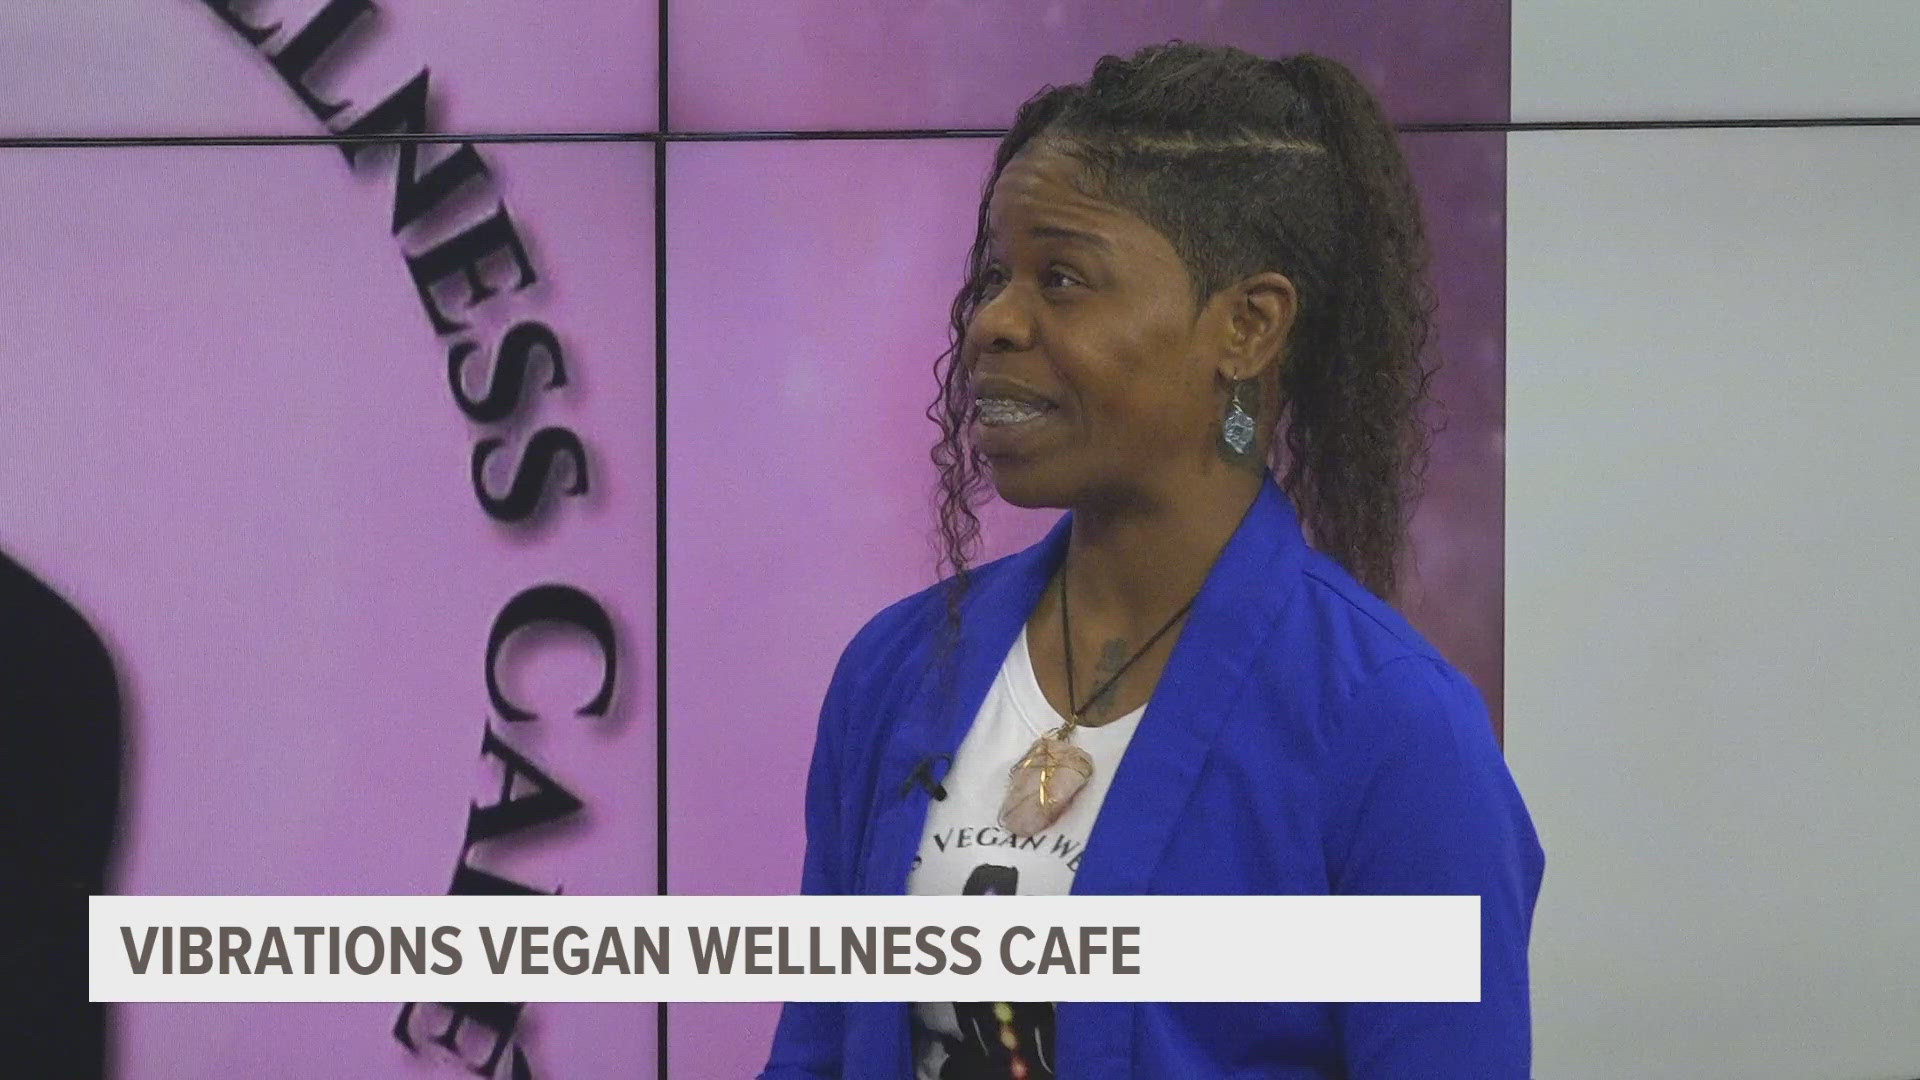 Find Vibrations Vegan Wellness Cafe in Waukee or at events around the community, including the Out to Lunch series on May 15 and May 29.